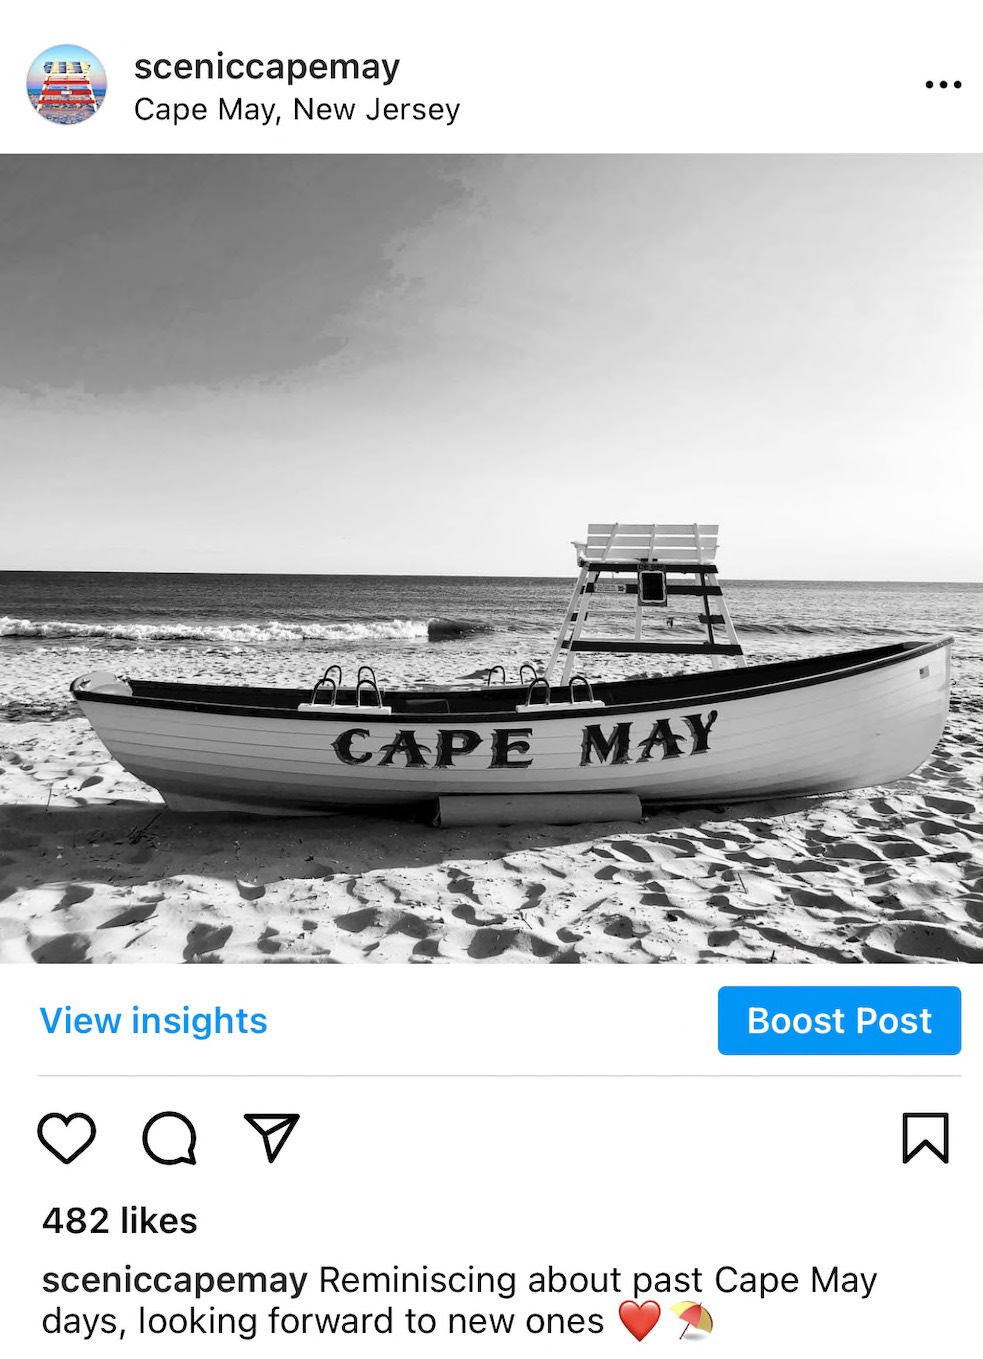 Post results for my location specific Cape May Instagram account, with nearly 500 favorites